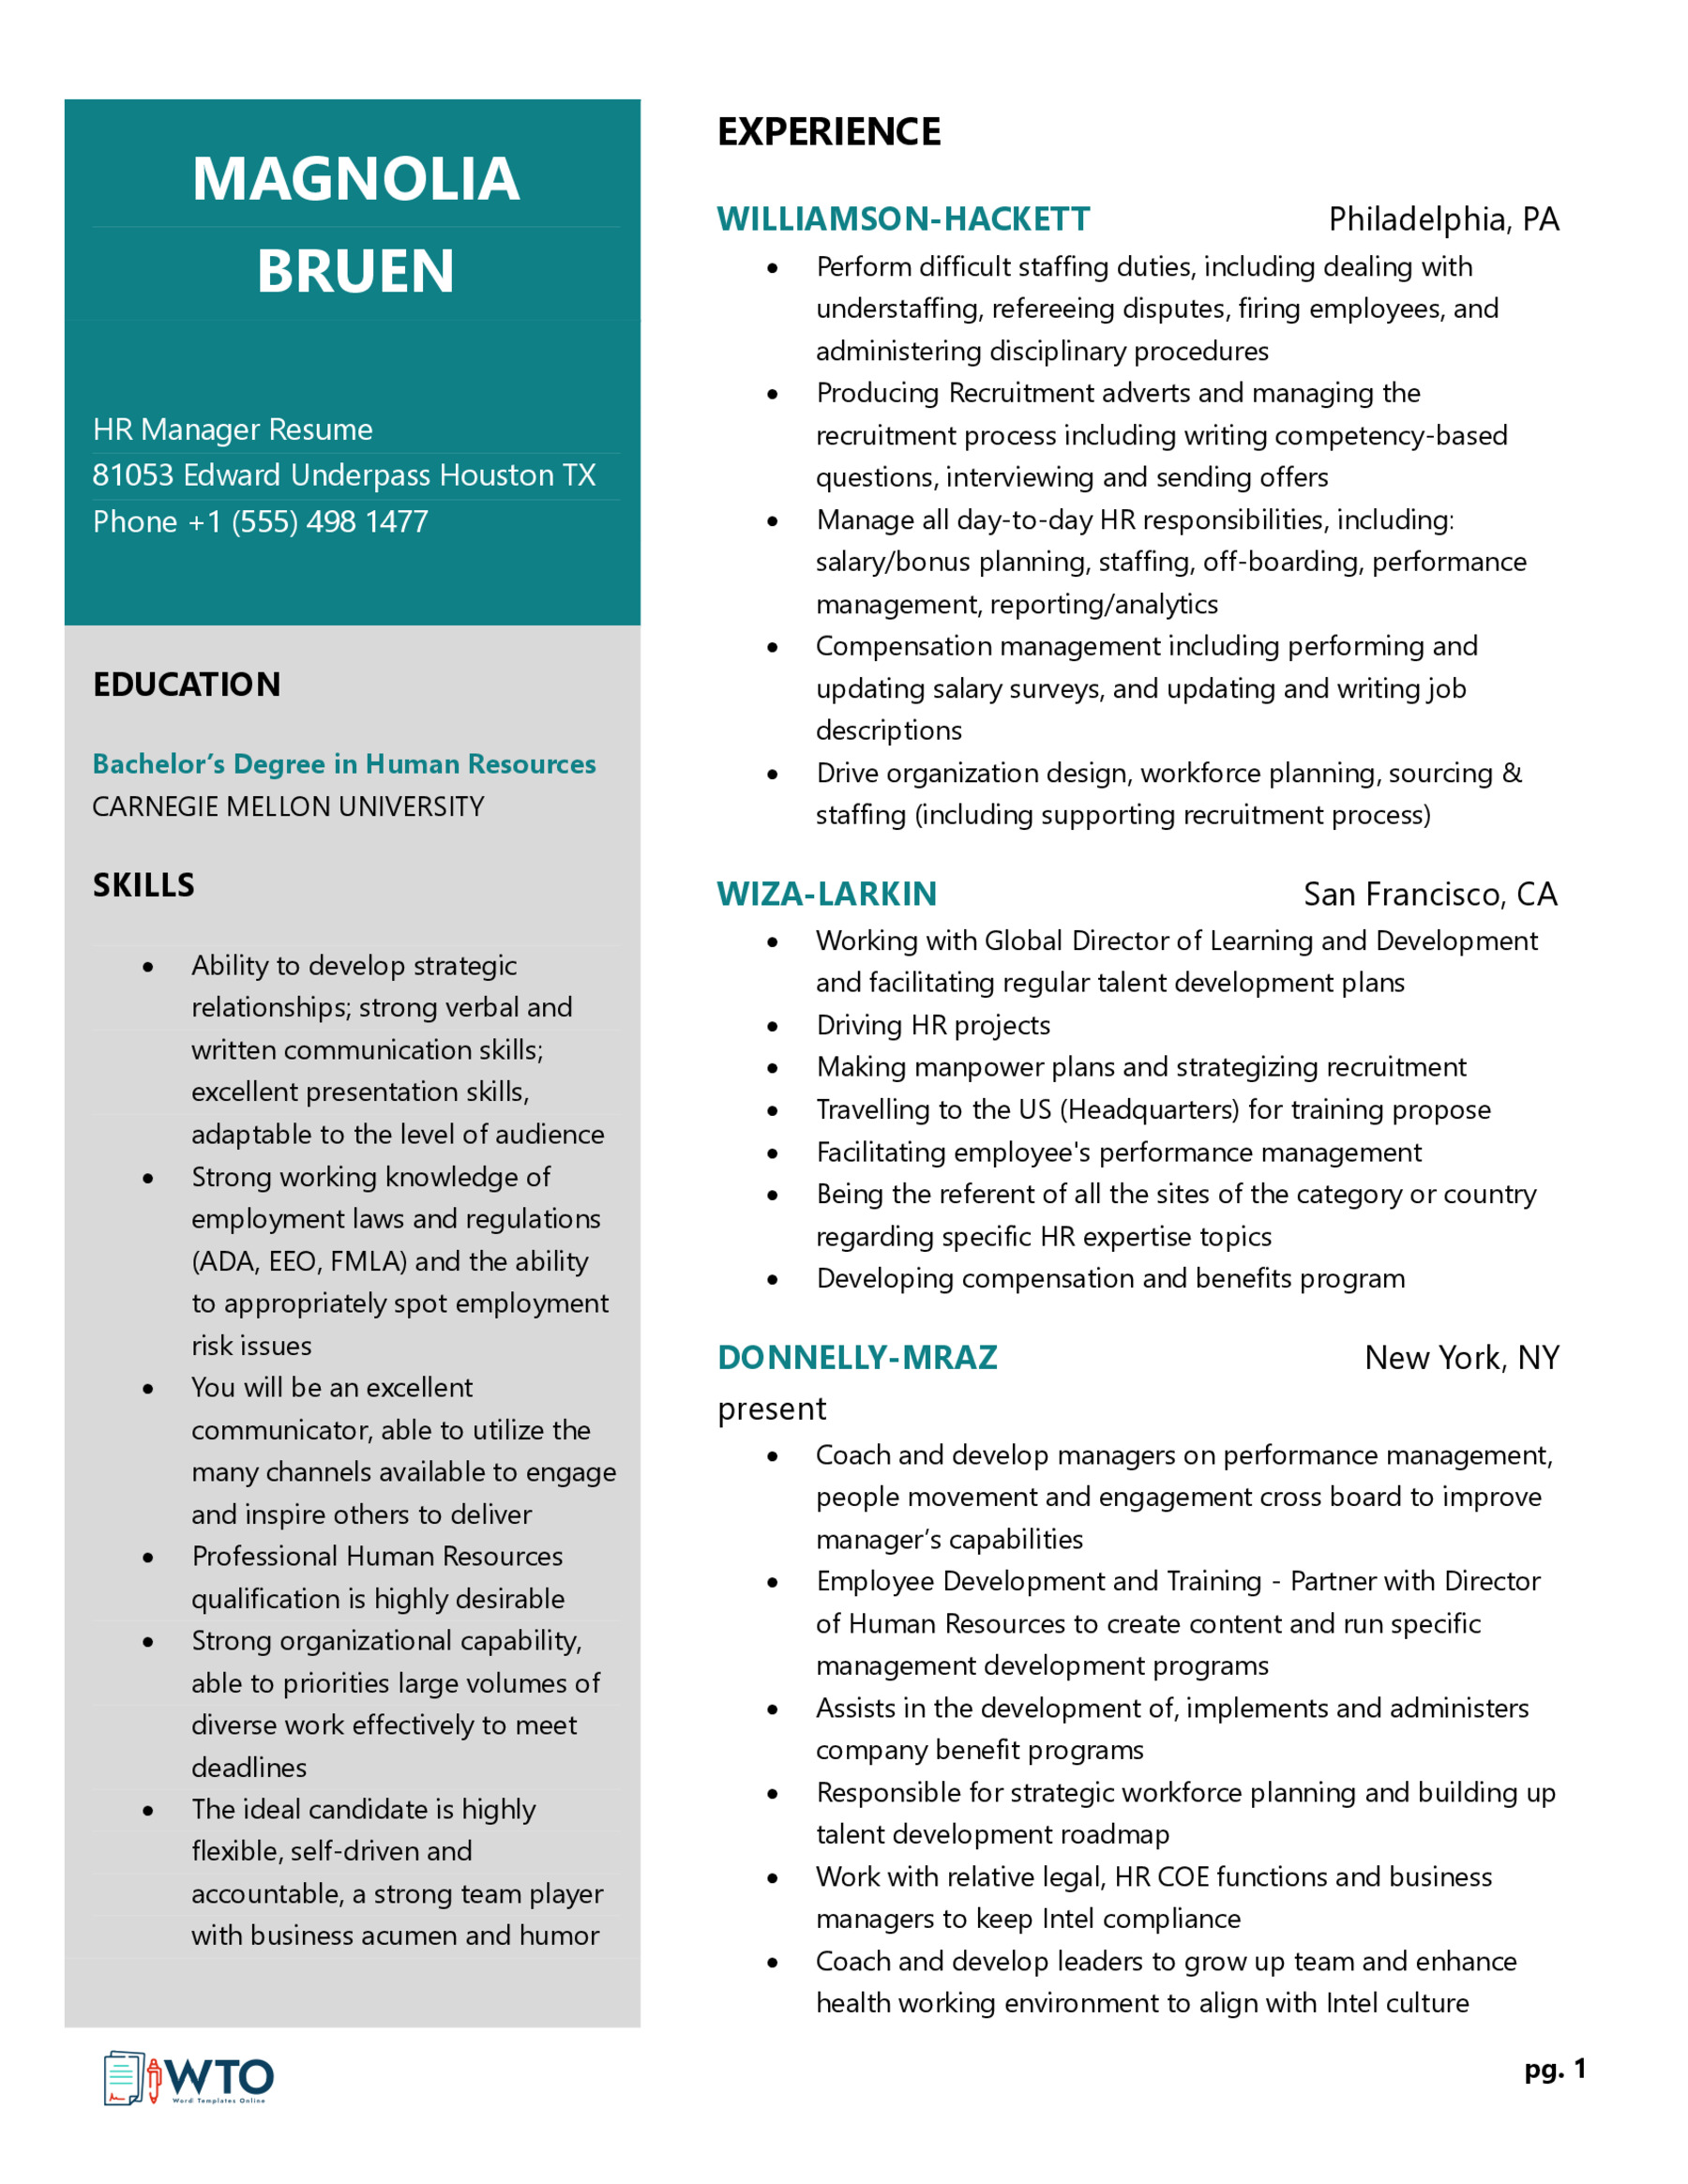 Free HR Manager Resume Template - Editable Format